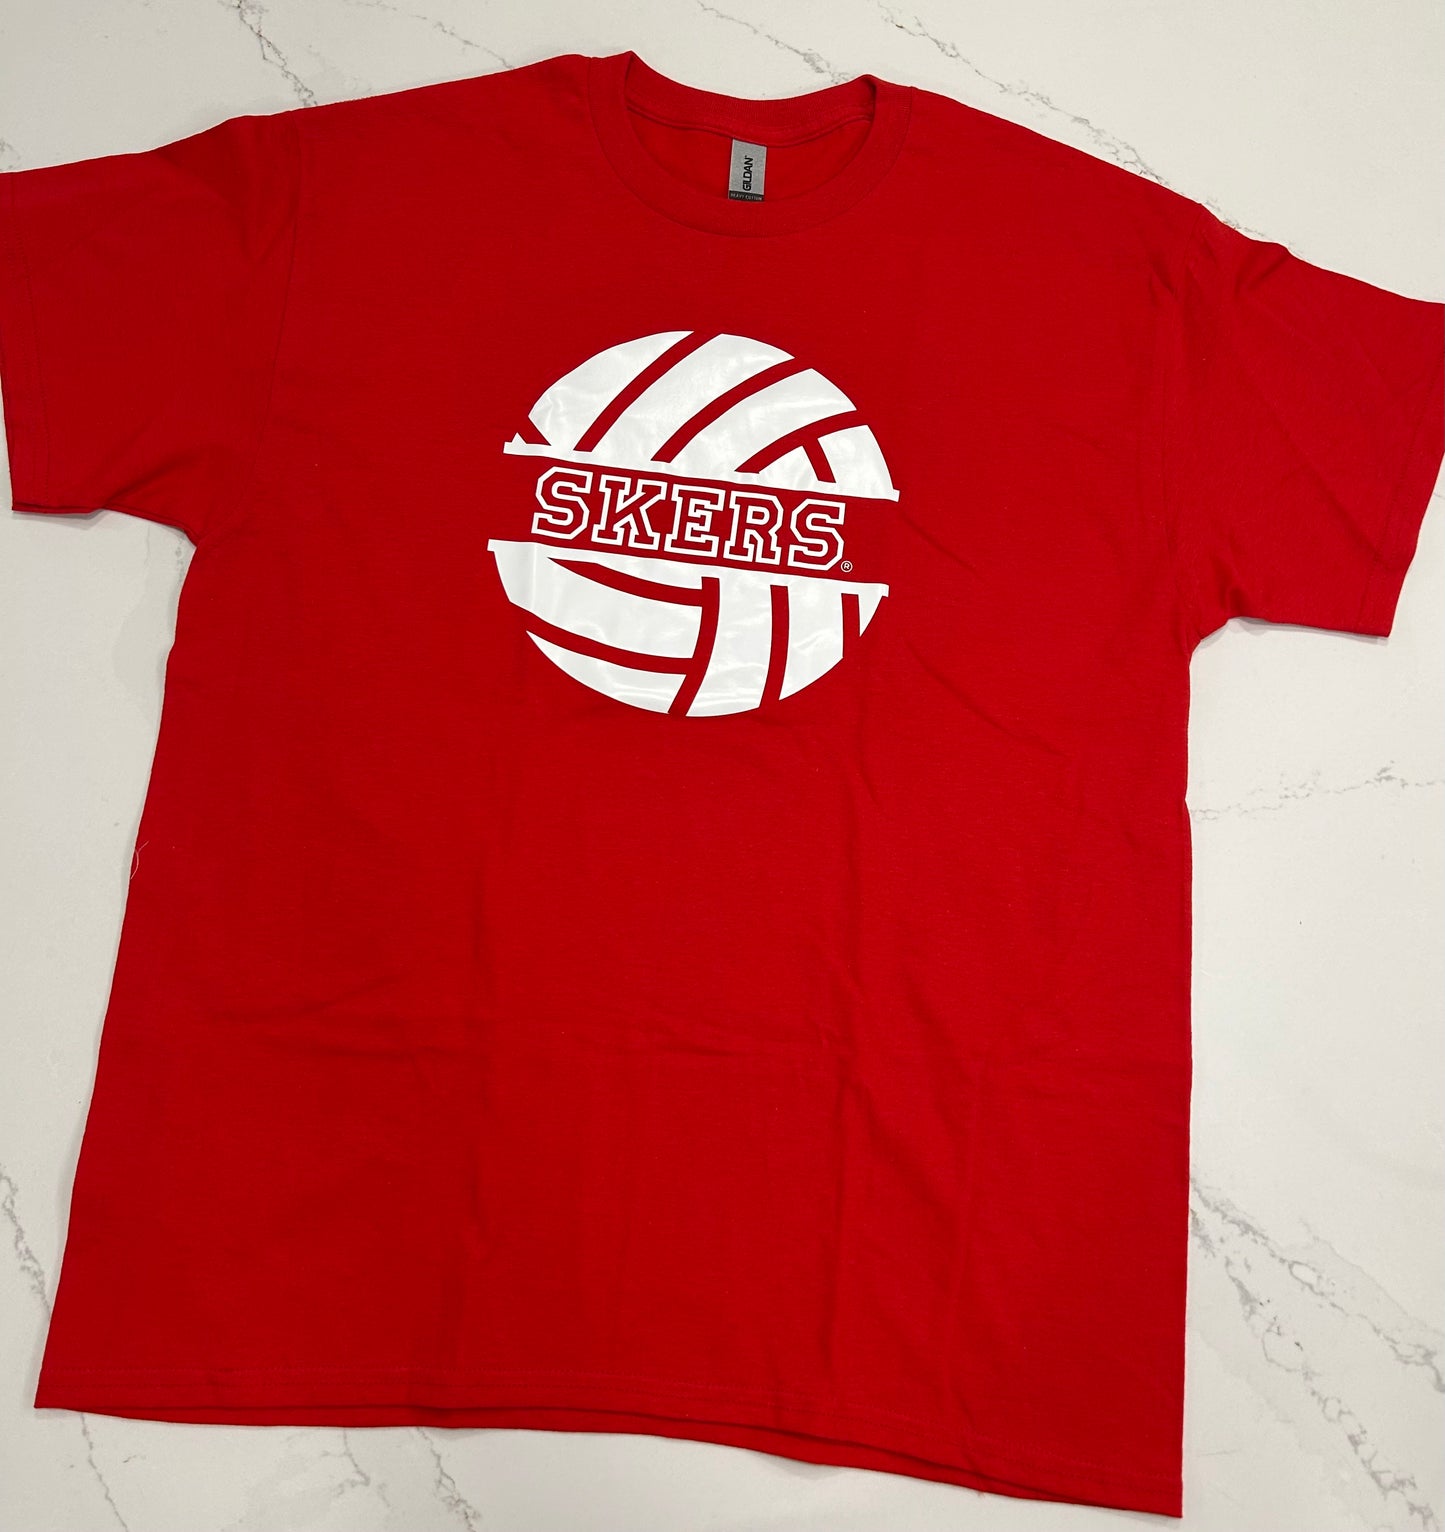 Skers Volleyball Red Unisex - Short Sleeve Shirt